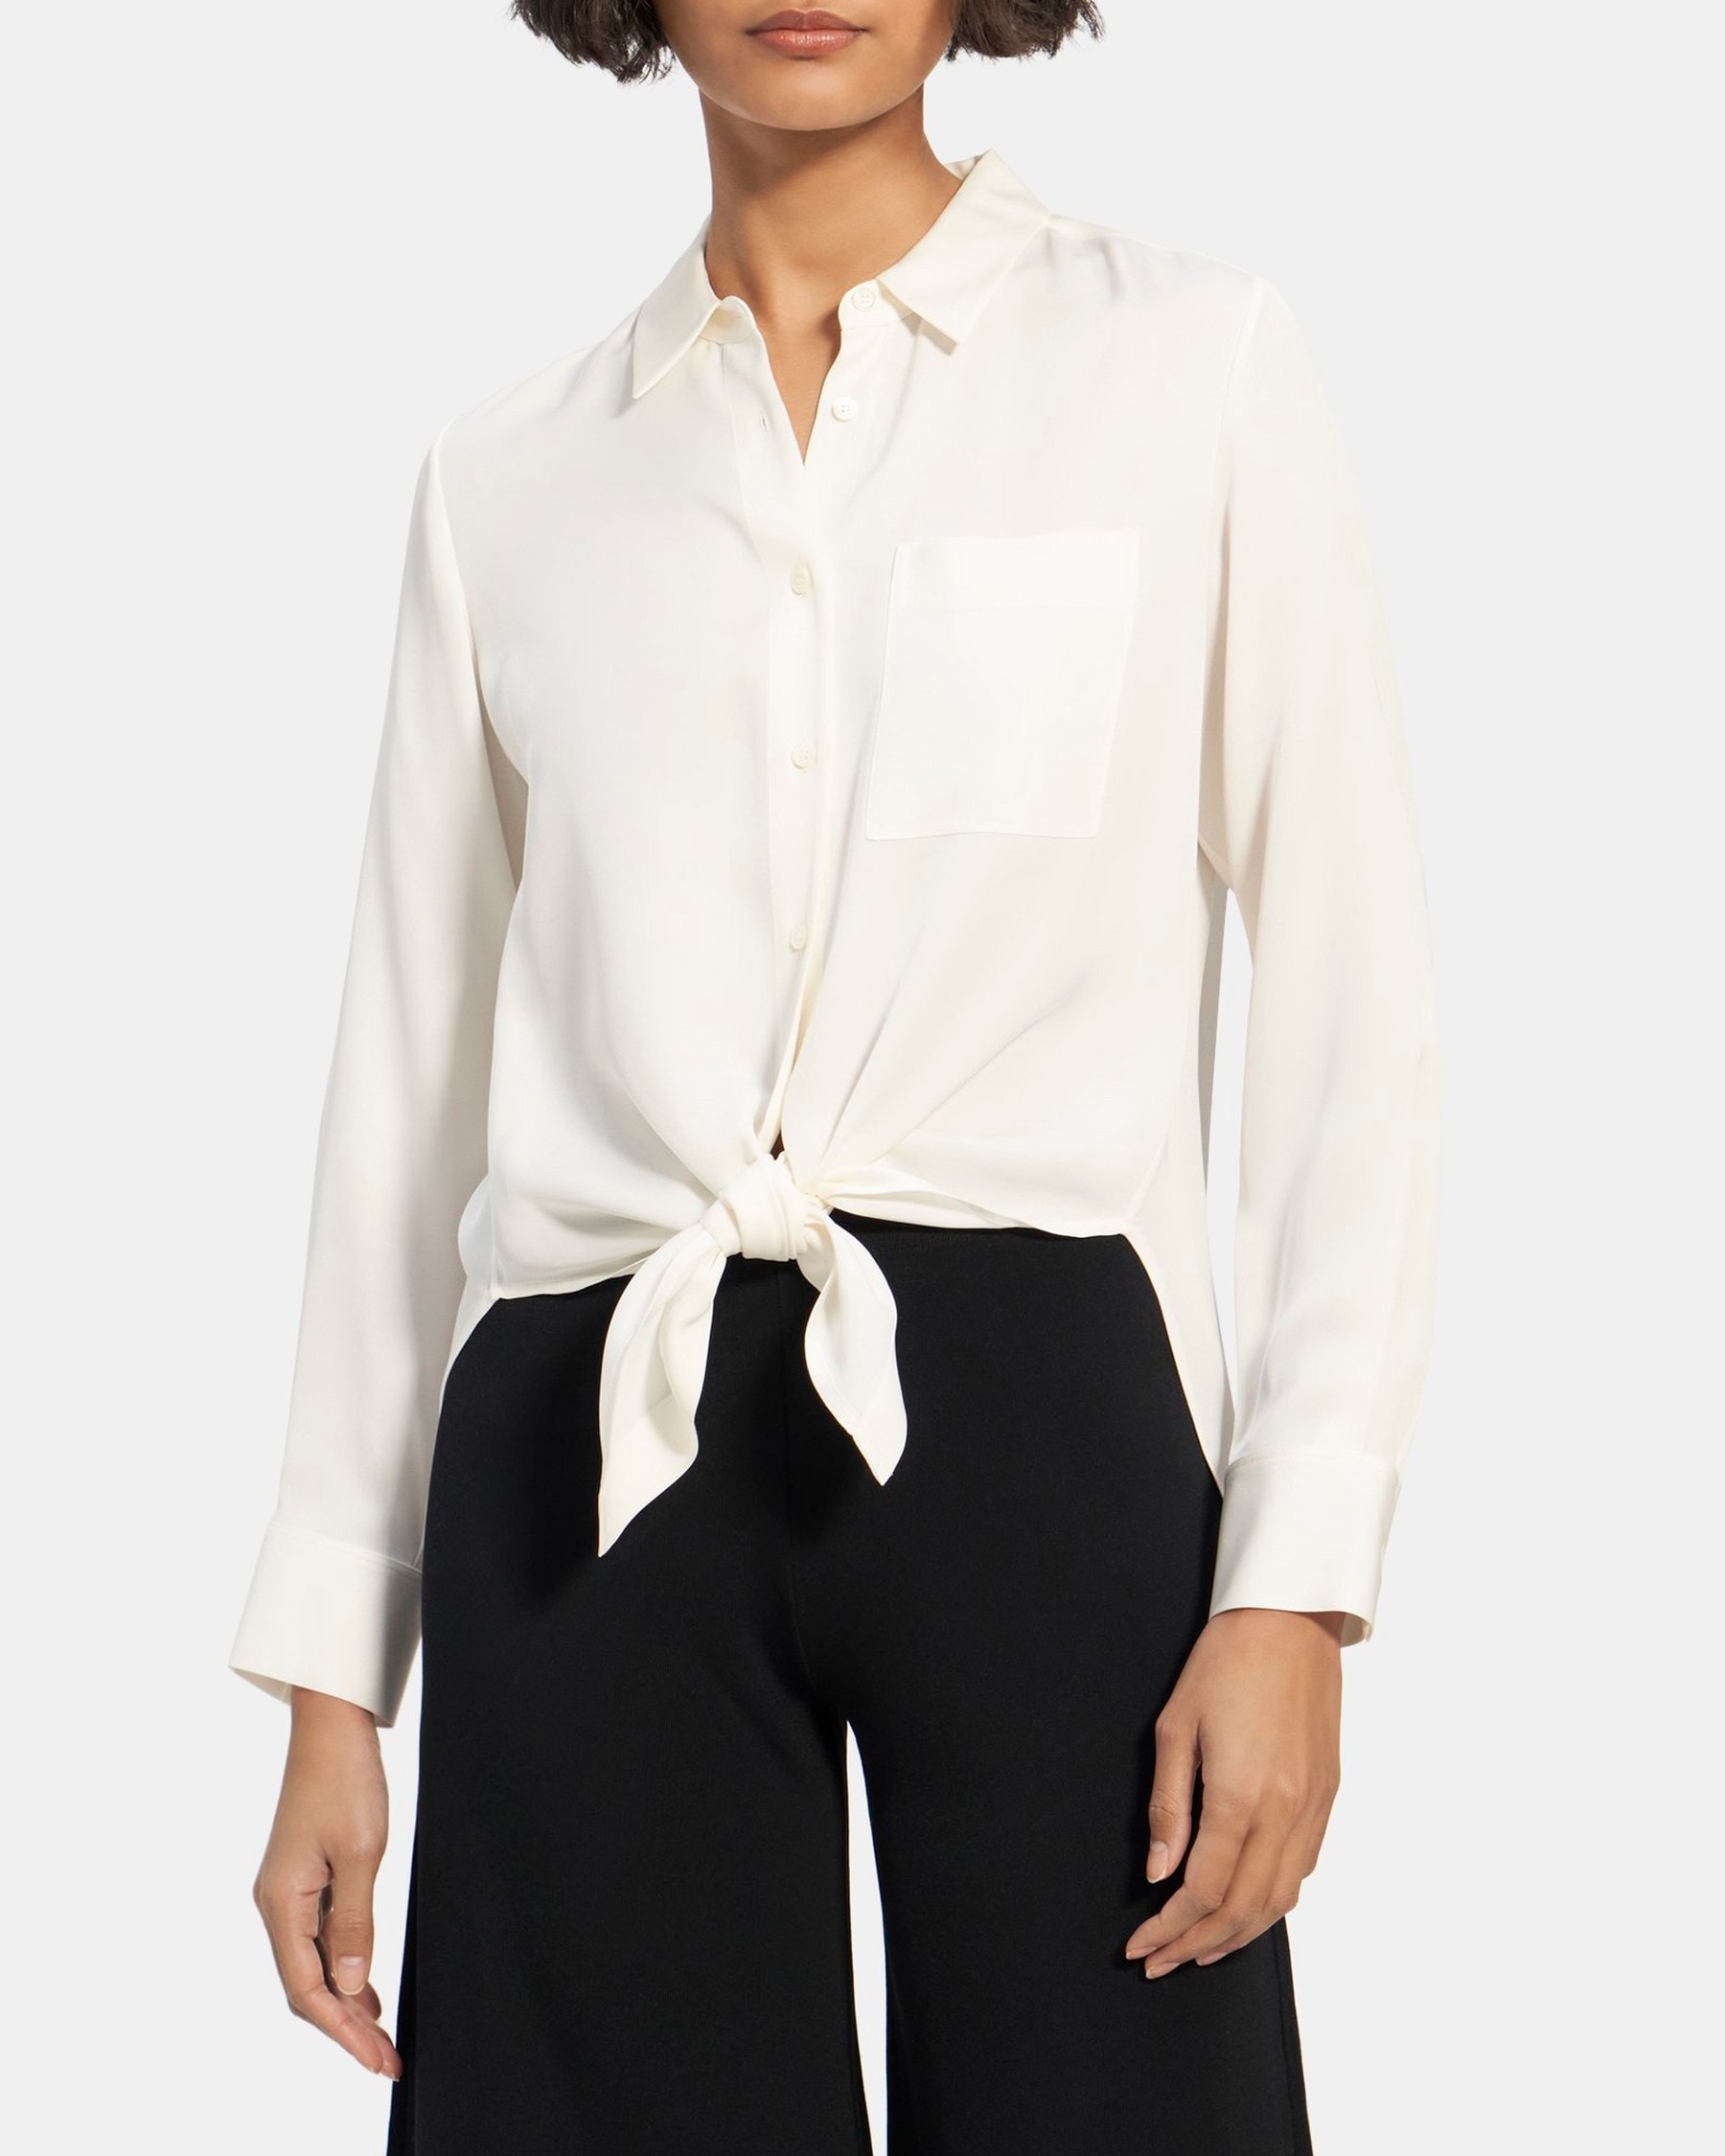 Tag væk Ikke nok Amorous Silk Georgette Tie-Front Shirt | Theory Outlet